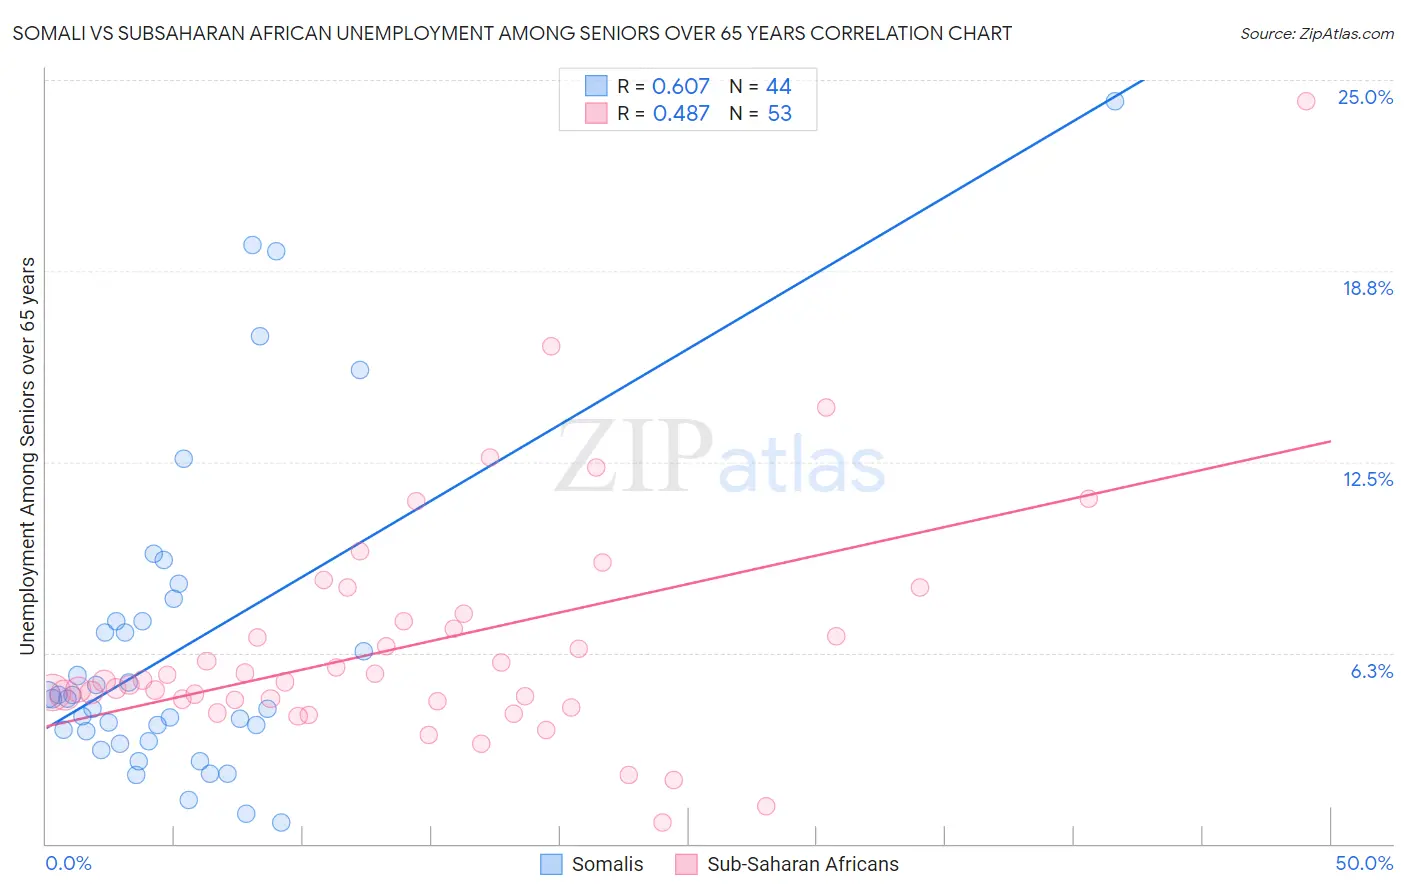 Somali vs Subsaharan African Unemployment Among Seniors over 65 years